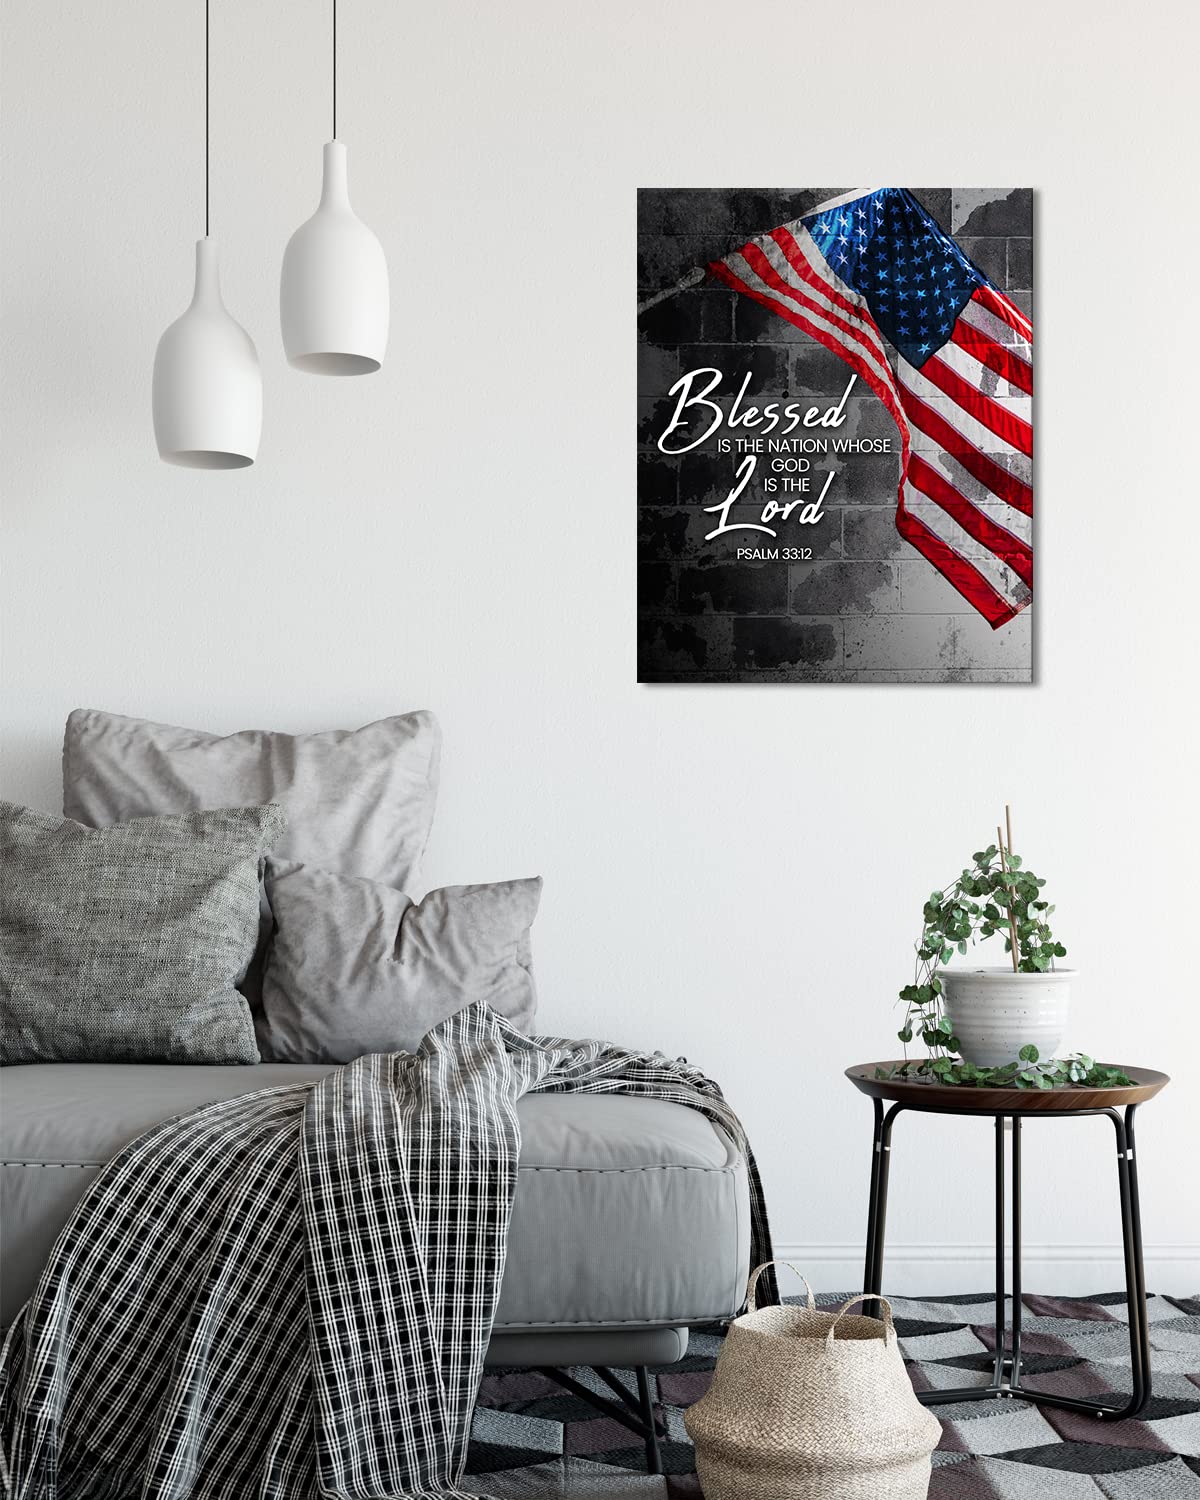 Blessed is the Nation Whose God is the Lord - Psalm 33:12 - Patriotic Wall Decor - American Patriotic Decor - Military Wall Decor - Patriot Decorations